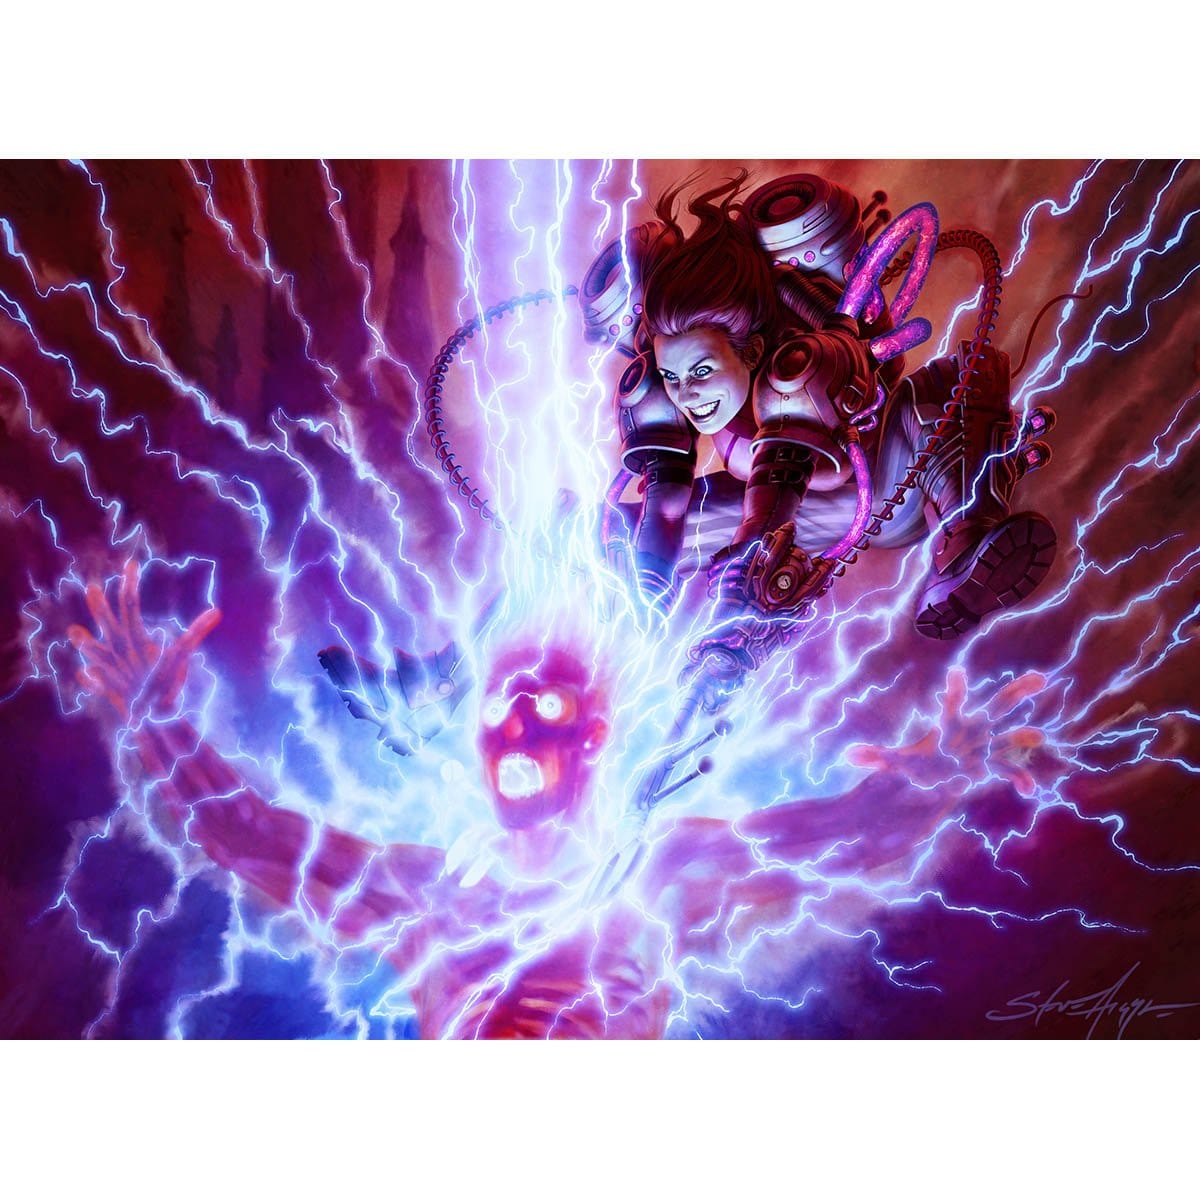 Sure Strike Print - Print - Original Magic Art - Accessories for Magic the Gathering and other card games